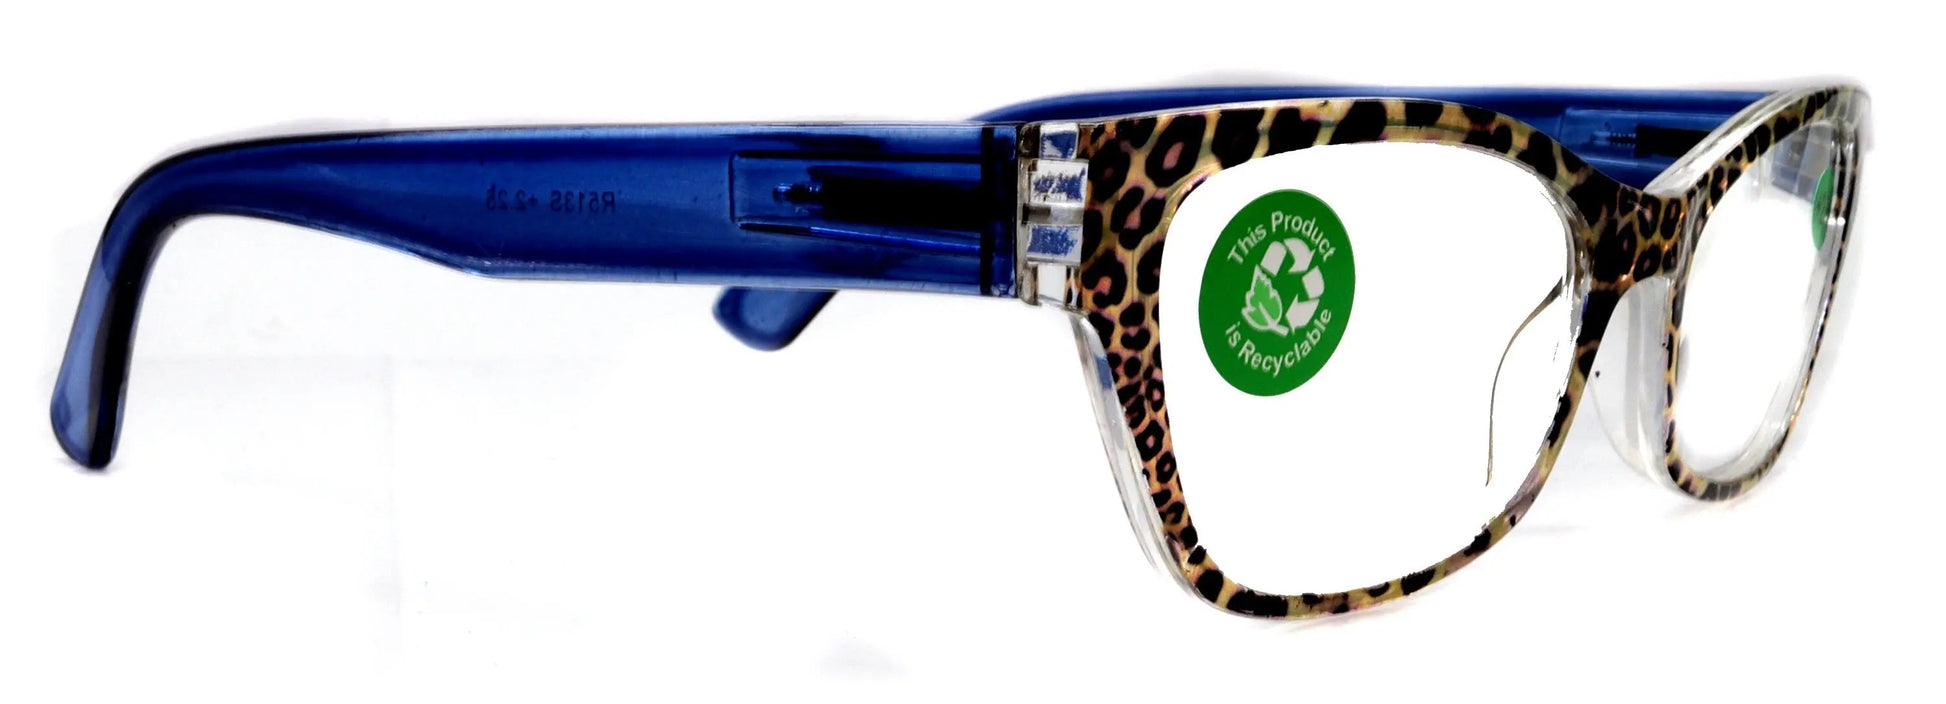 Panthera, (Premium) Reading Glasses, High End Readers +1.25..+3 Magnifying, Cat Eye. Optical Frames (Leopard Brown, Blue)  NY Fifth Avenue.